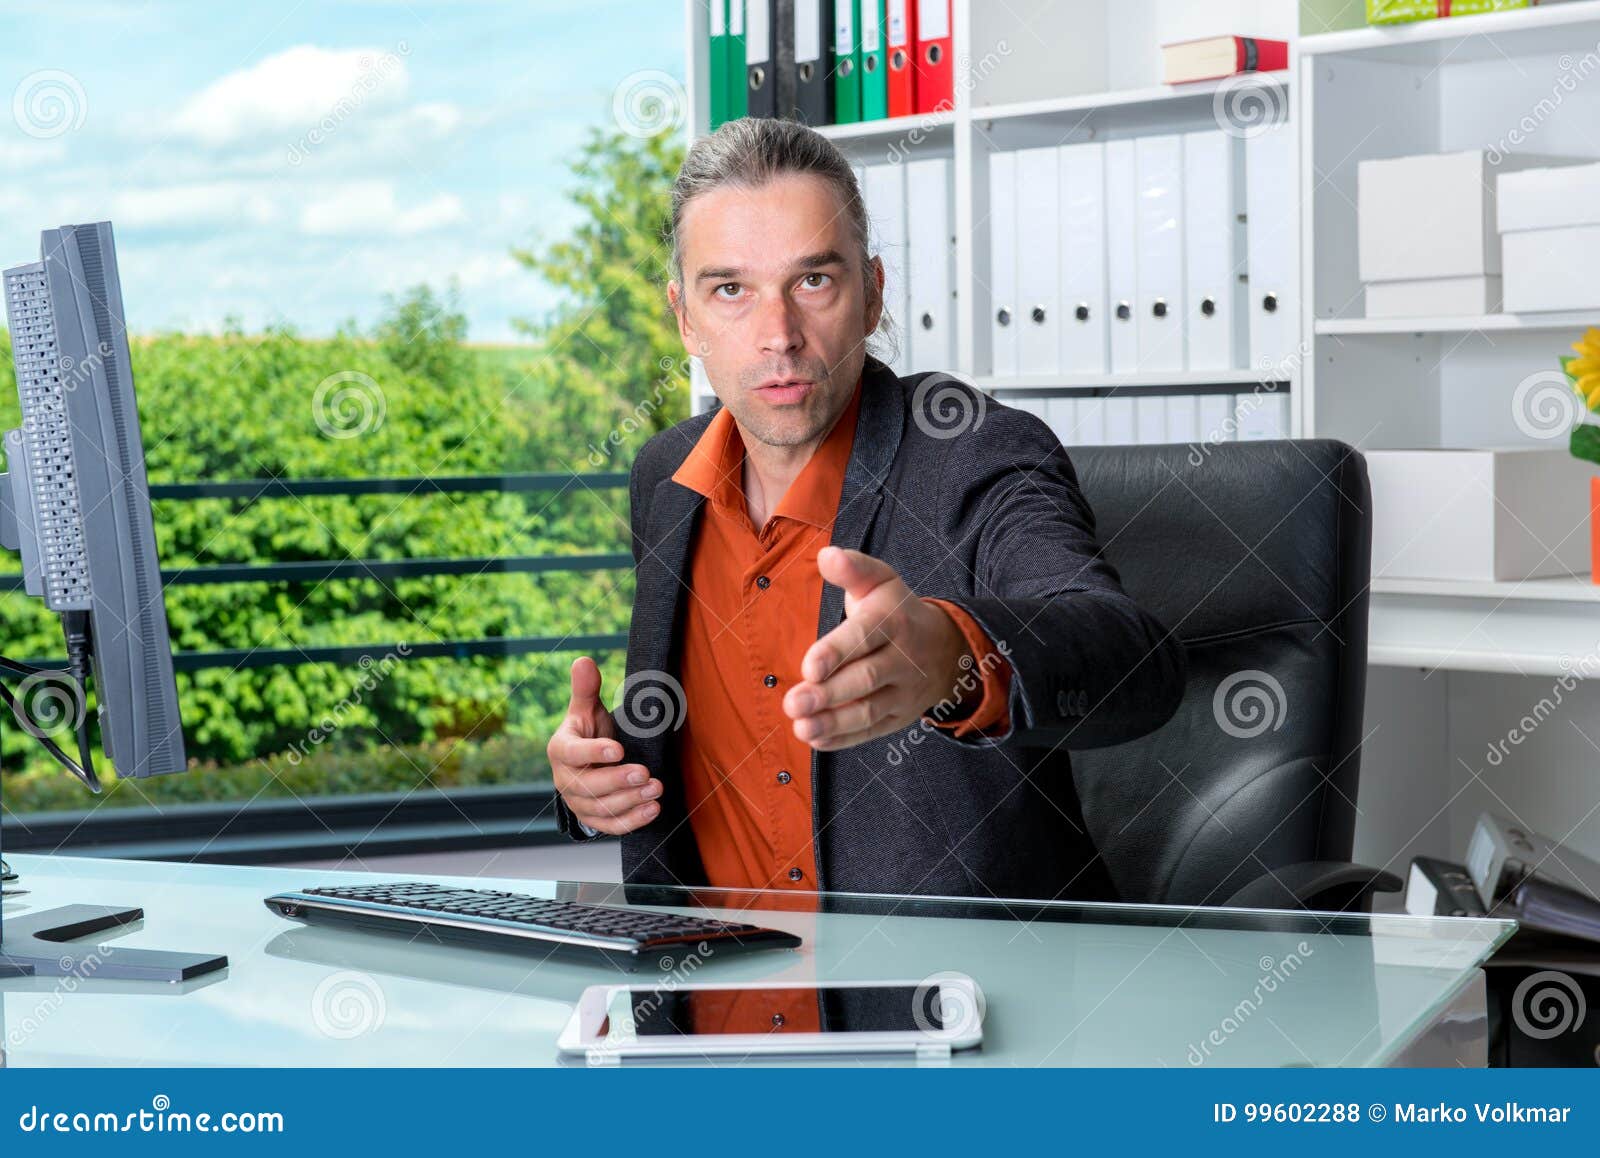 business man behind his desk greeted a client